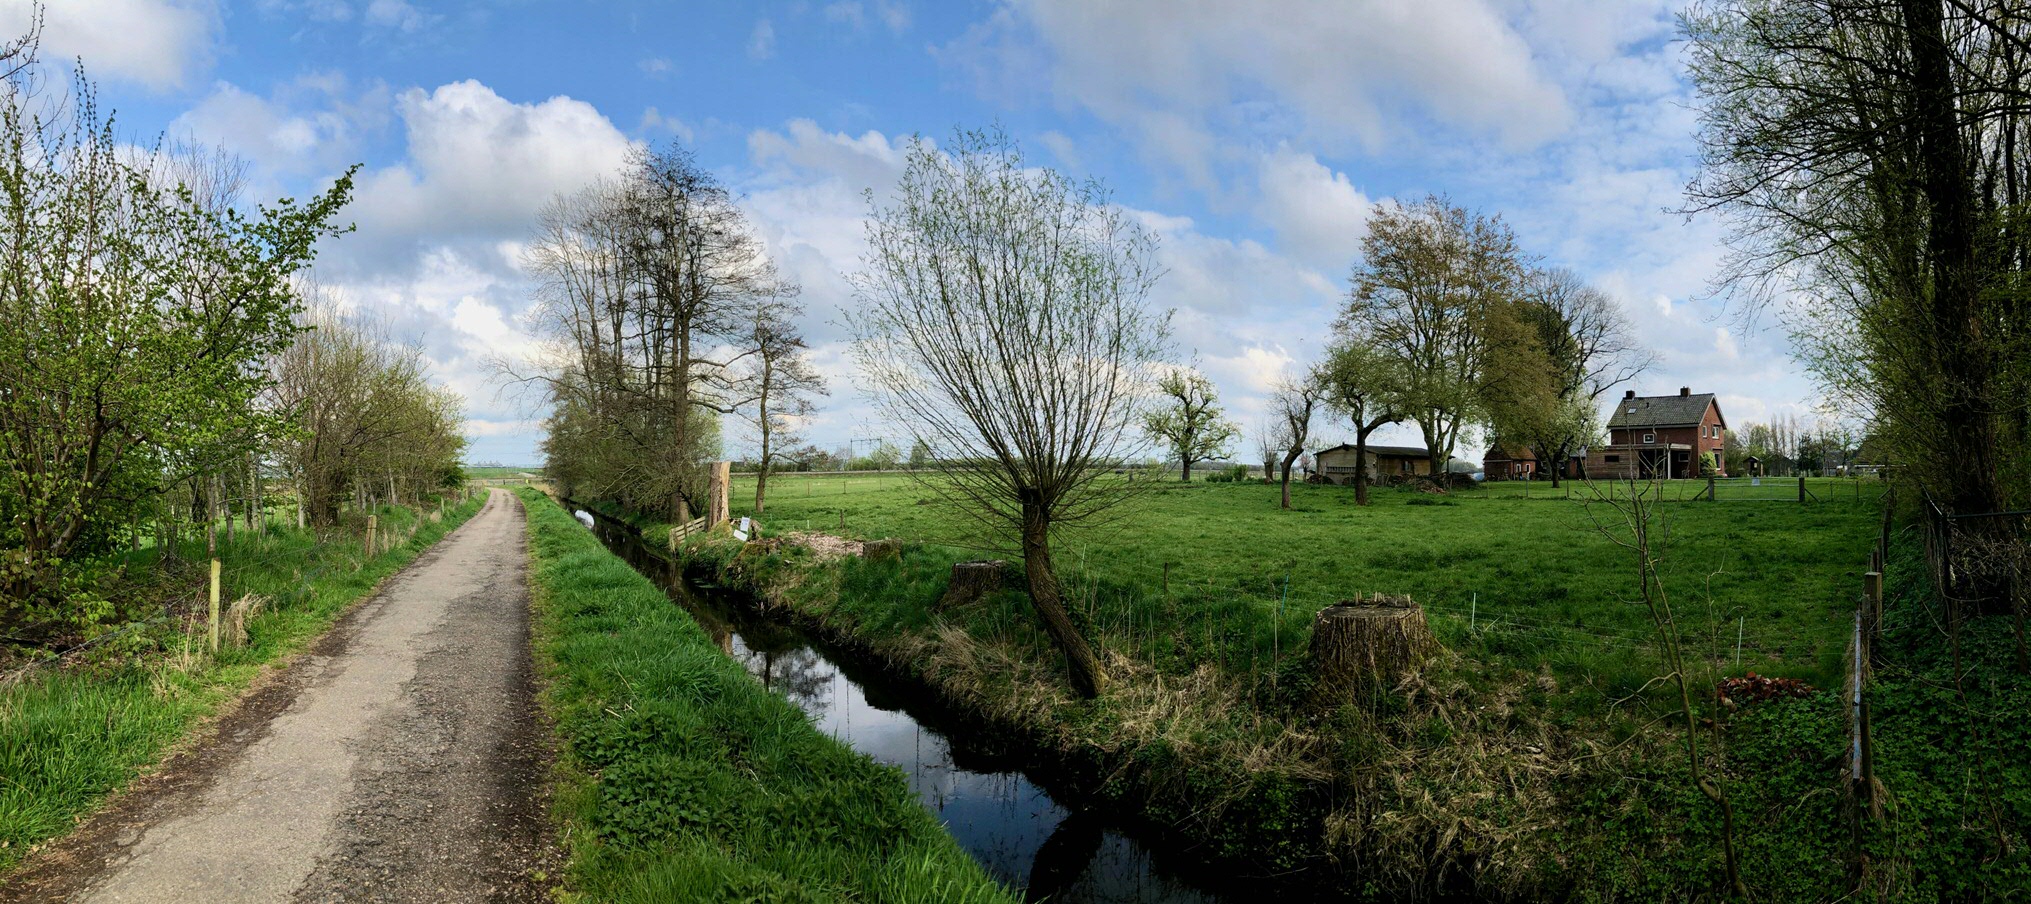 Essen in April 2021. This ditch is all that remains of the canal that used to run around the convent. The canal was linked to the Hunze river. The convent stood on the land to the right of the ditch shown here.